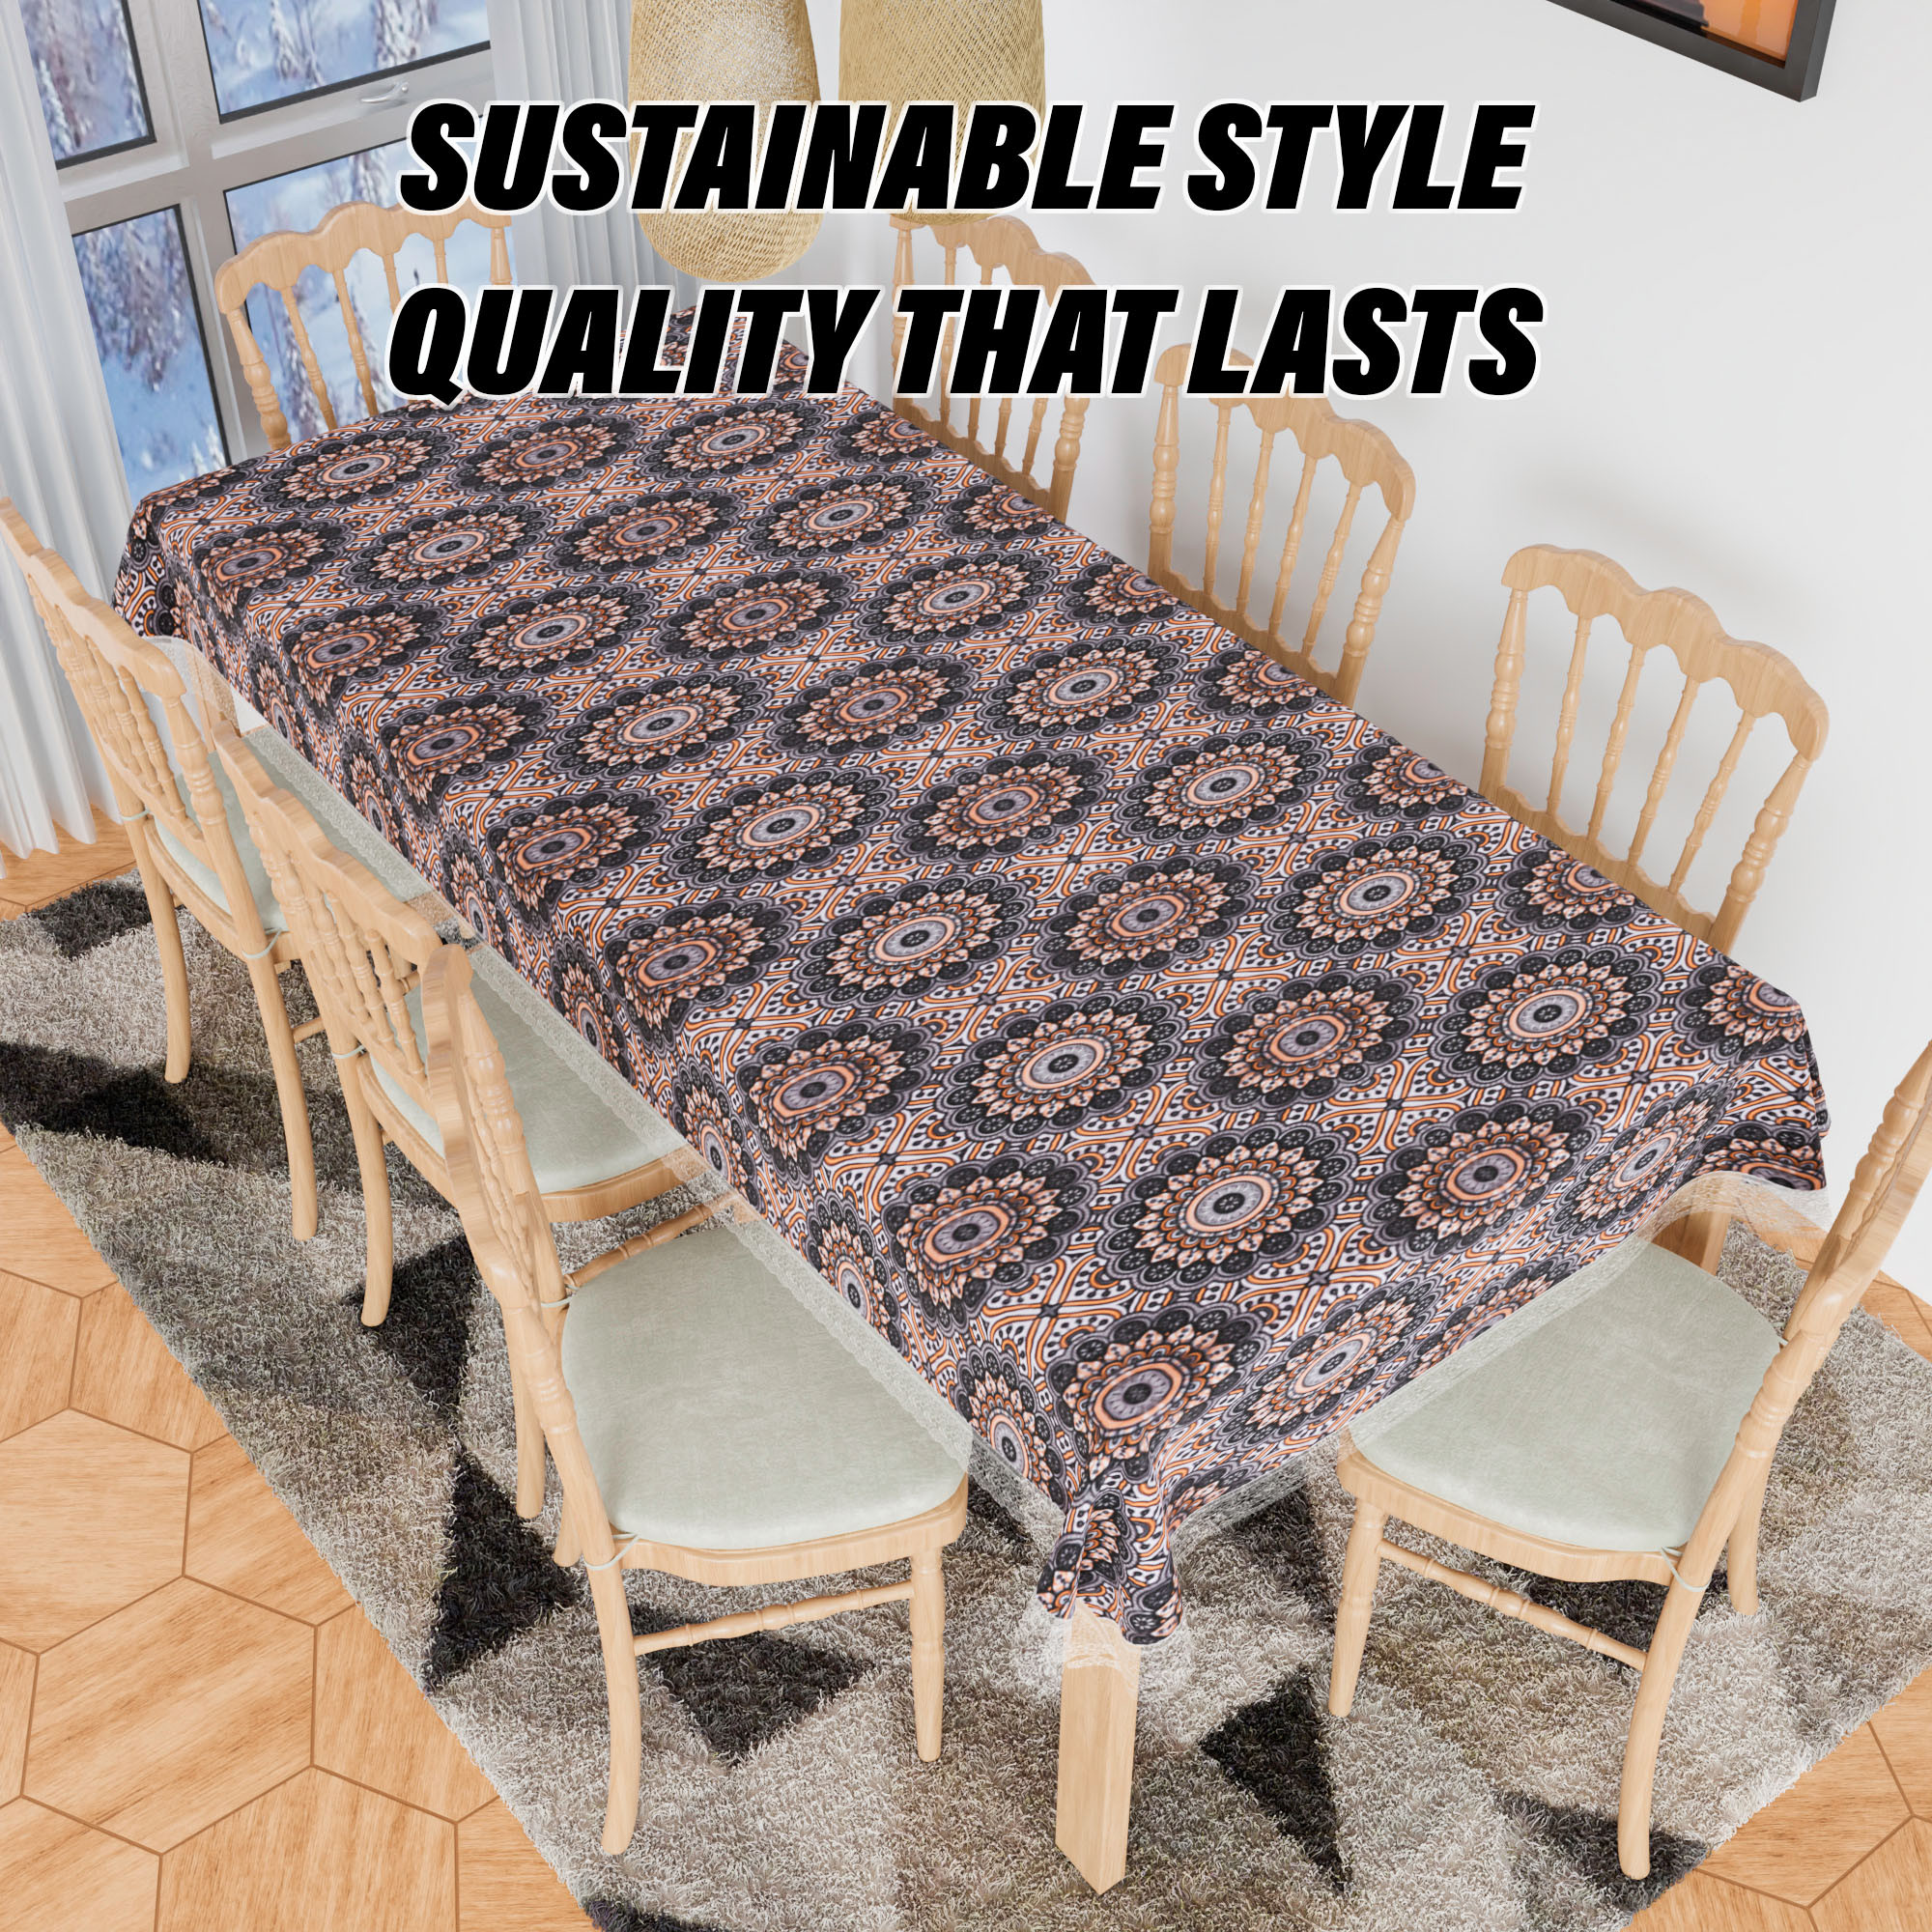 Kuber Industries Dining Table Cover | PVC Table Cloth Cover | 8-Seater Table Cloth | Table Protector Cover | Table Cover for Dining Table | Rangoli Table Cover | 60x90 Inch | DTC | Black